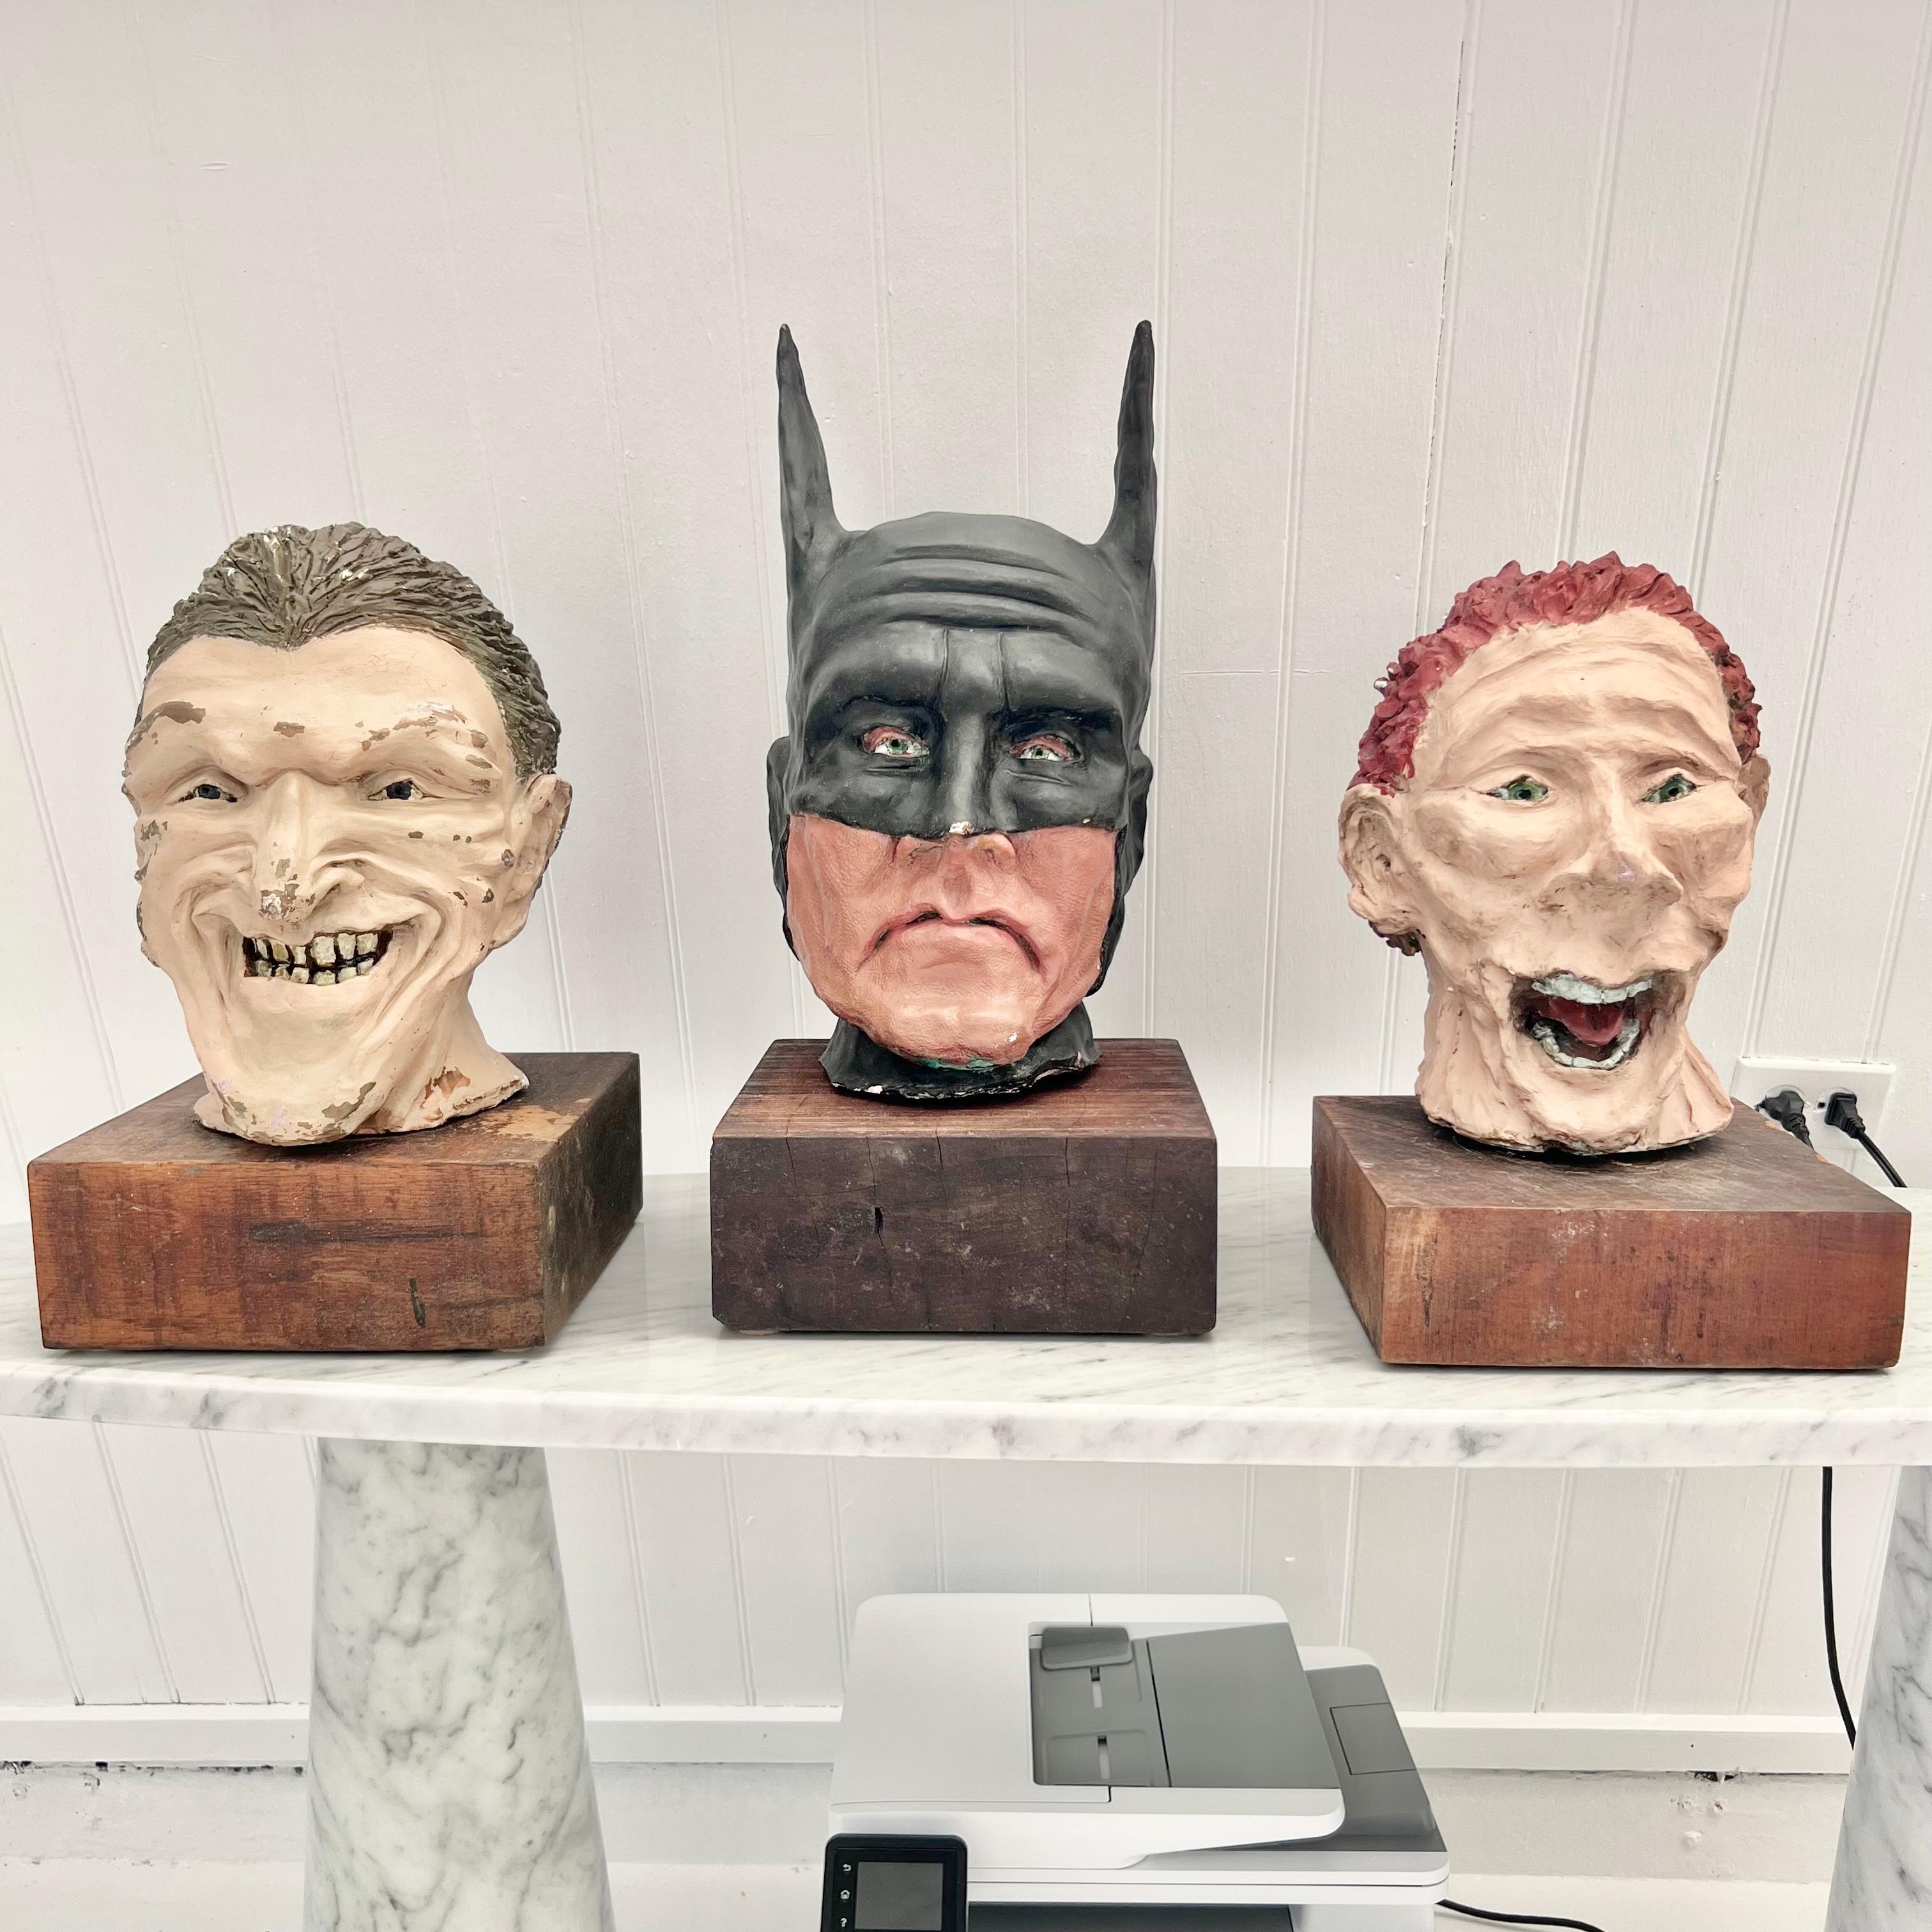 Unique and peculiar painted clay character busts of Batman, Joker and Riddler. Life sized, heavy, and well made. Unknown provenance. All signed 'AG 2004' on the back carved into the clay. Unable to find anything similar online. A wonderfully creepy